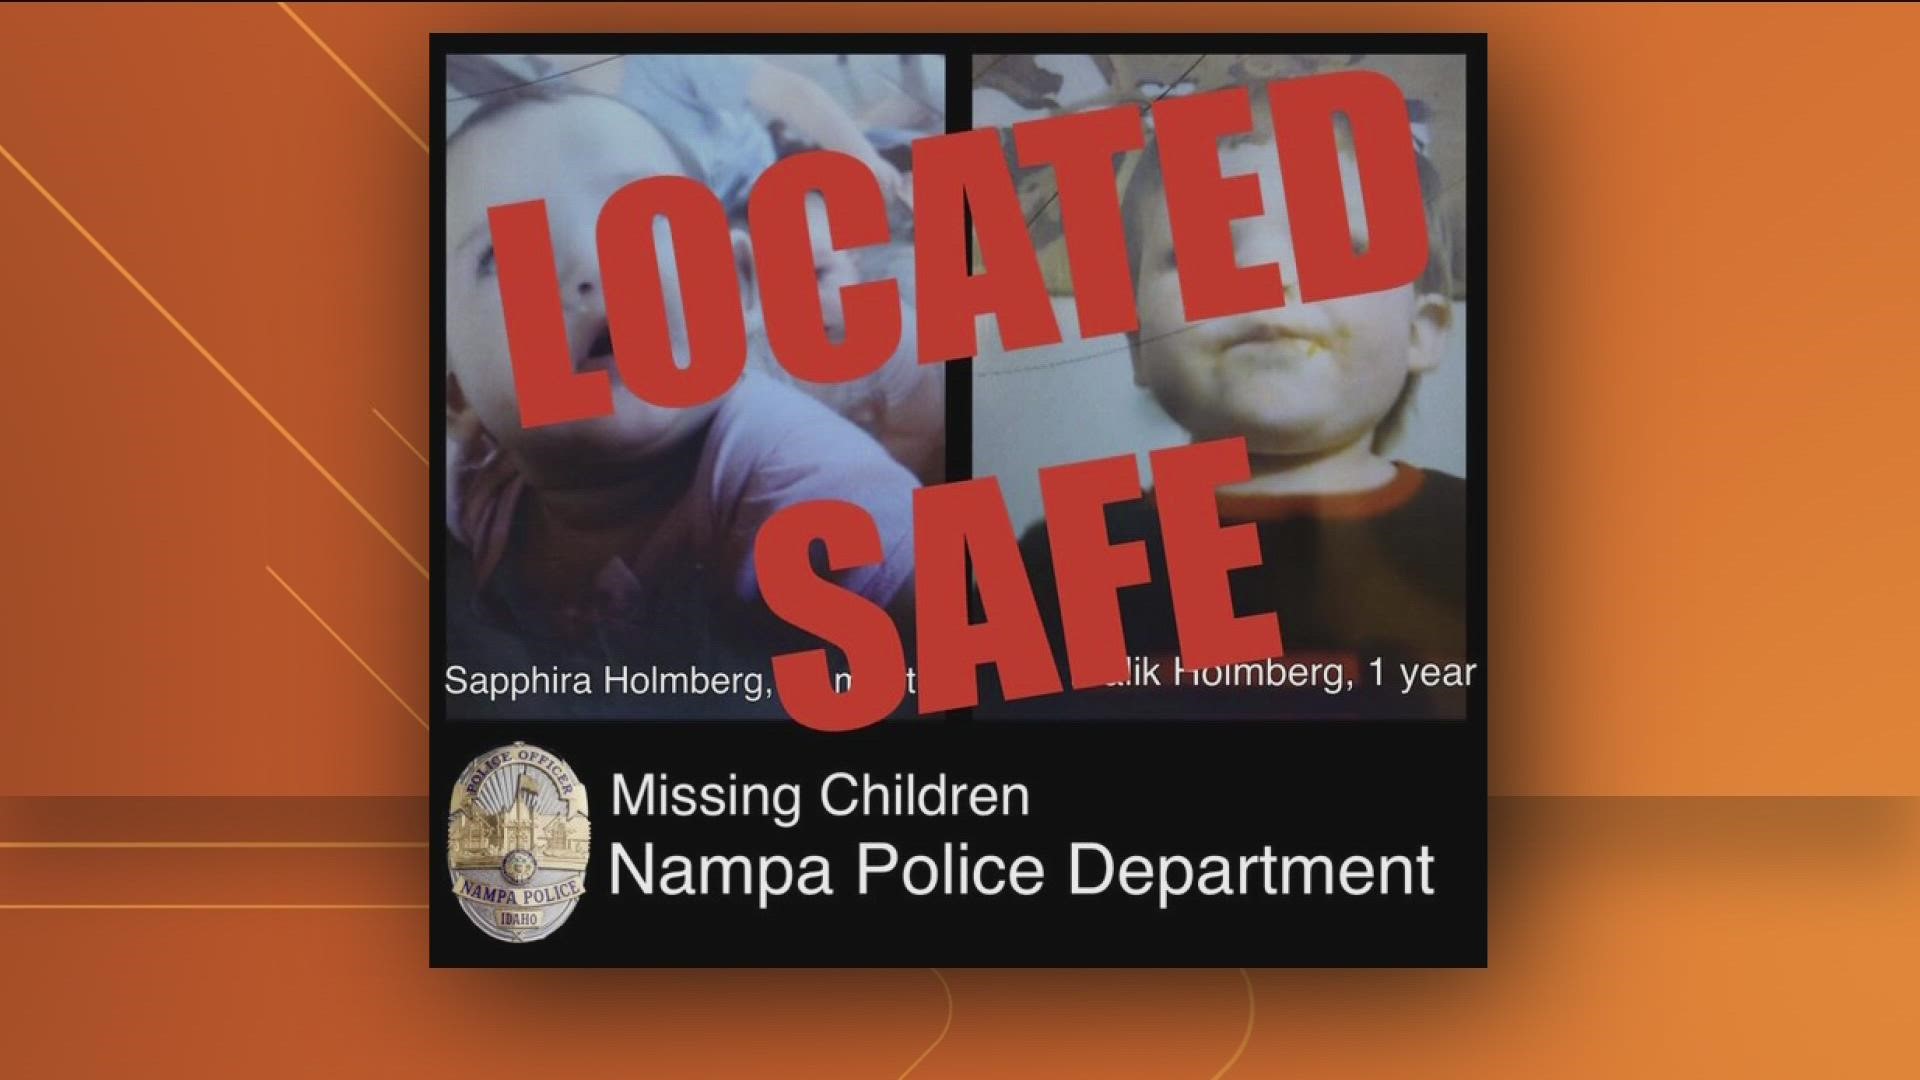 About three hours after the alert went out, Nampa Police said the children have been located and are now safe.